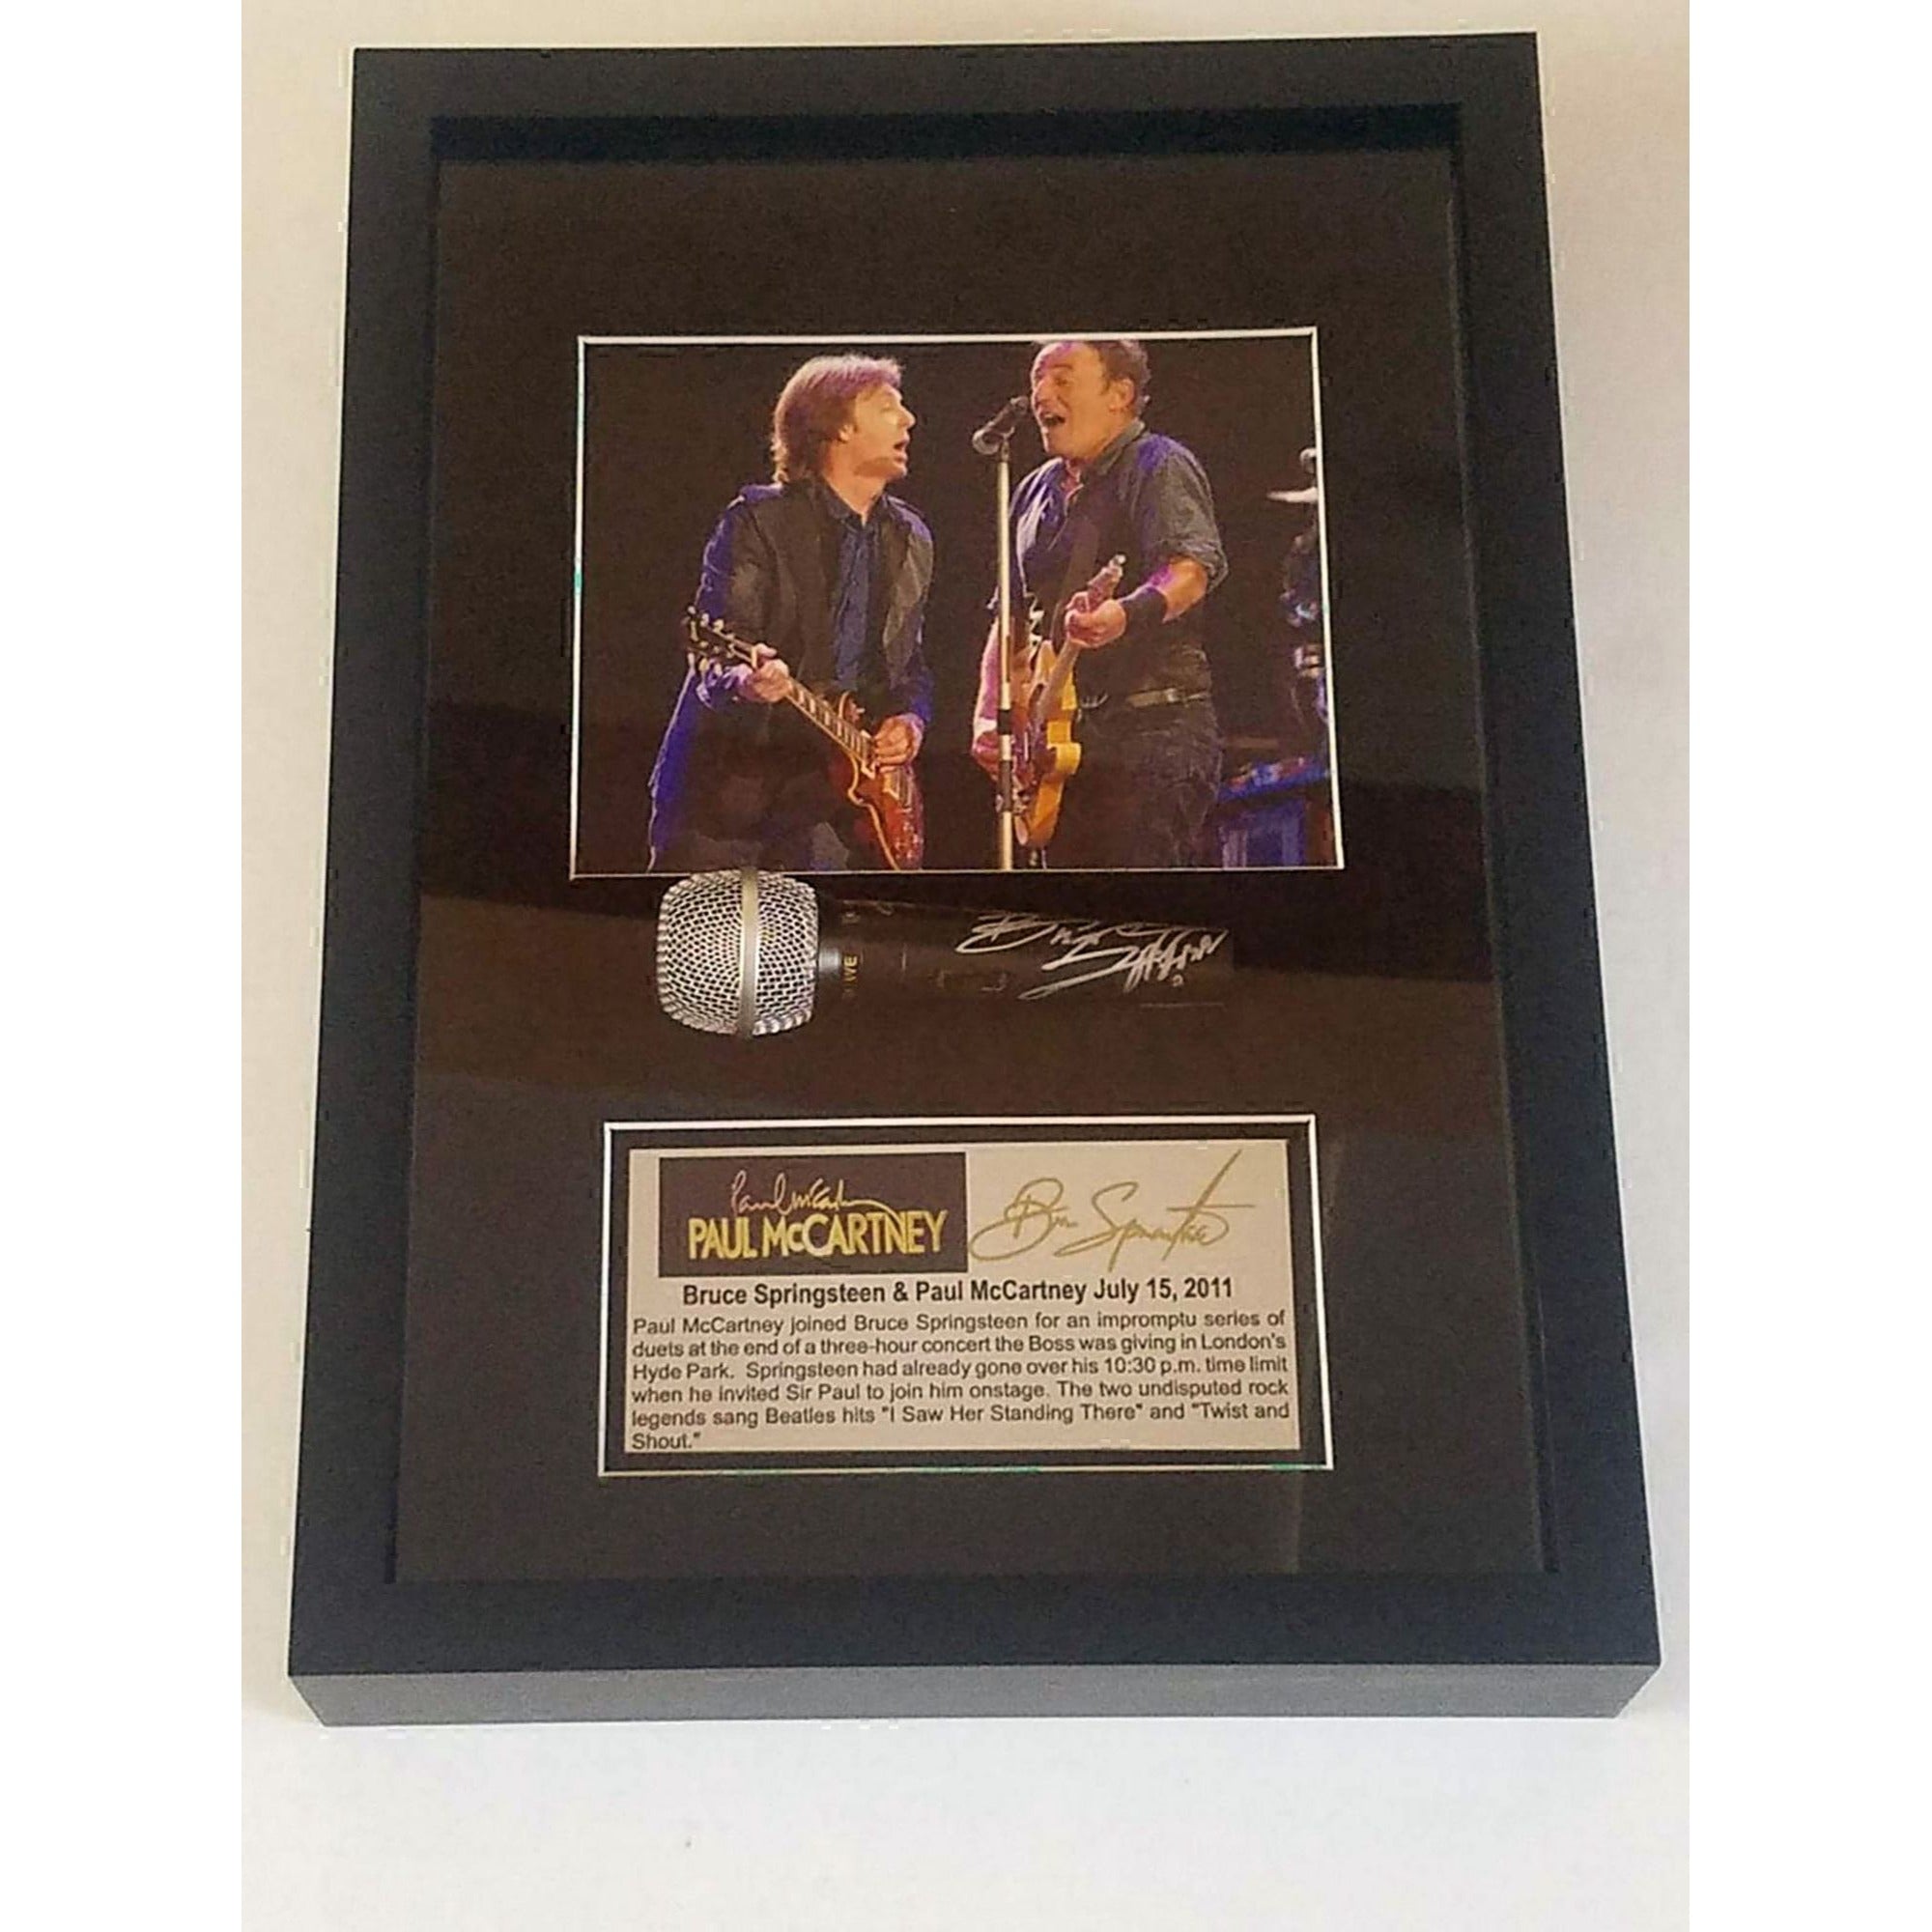 Paul McCartney and Bruce Springsteen signed and framed microphone with proof